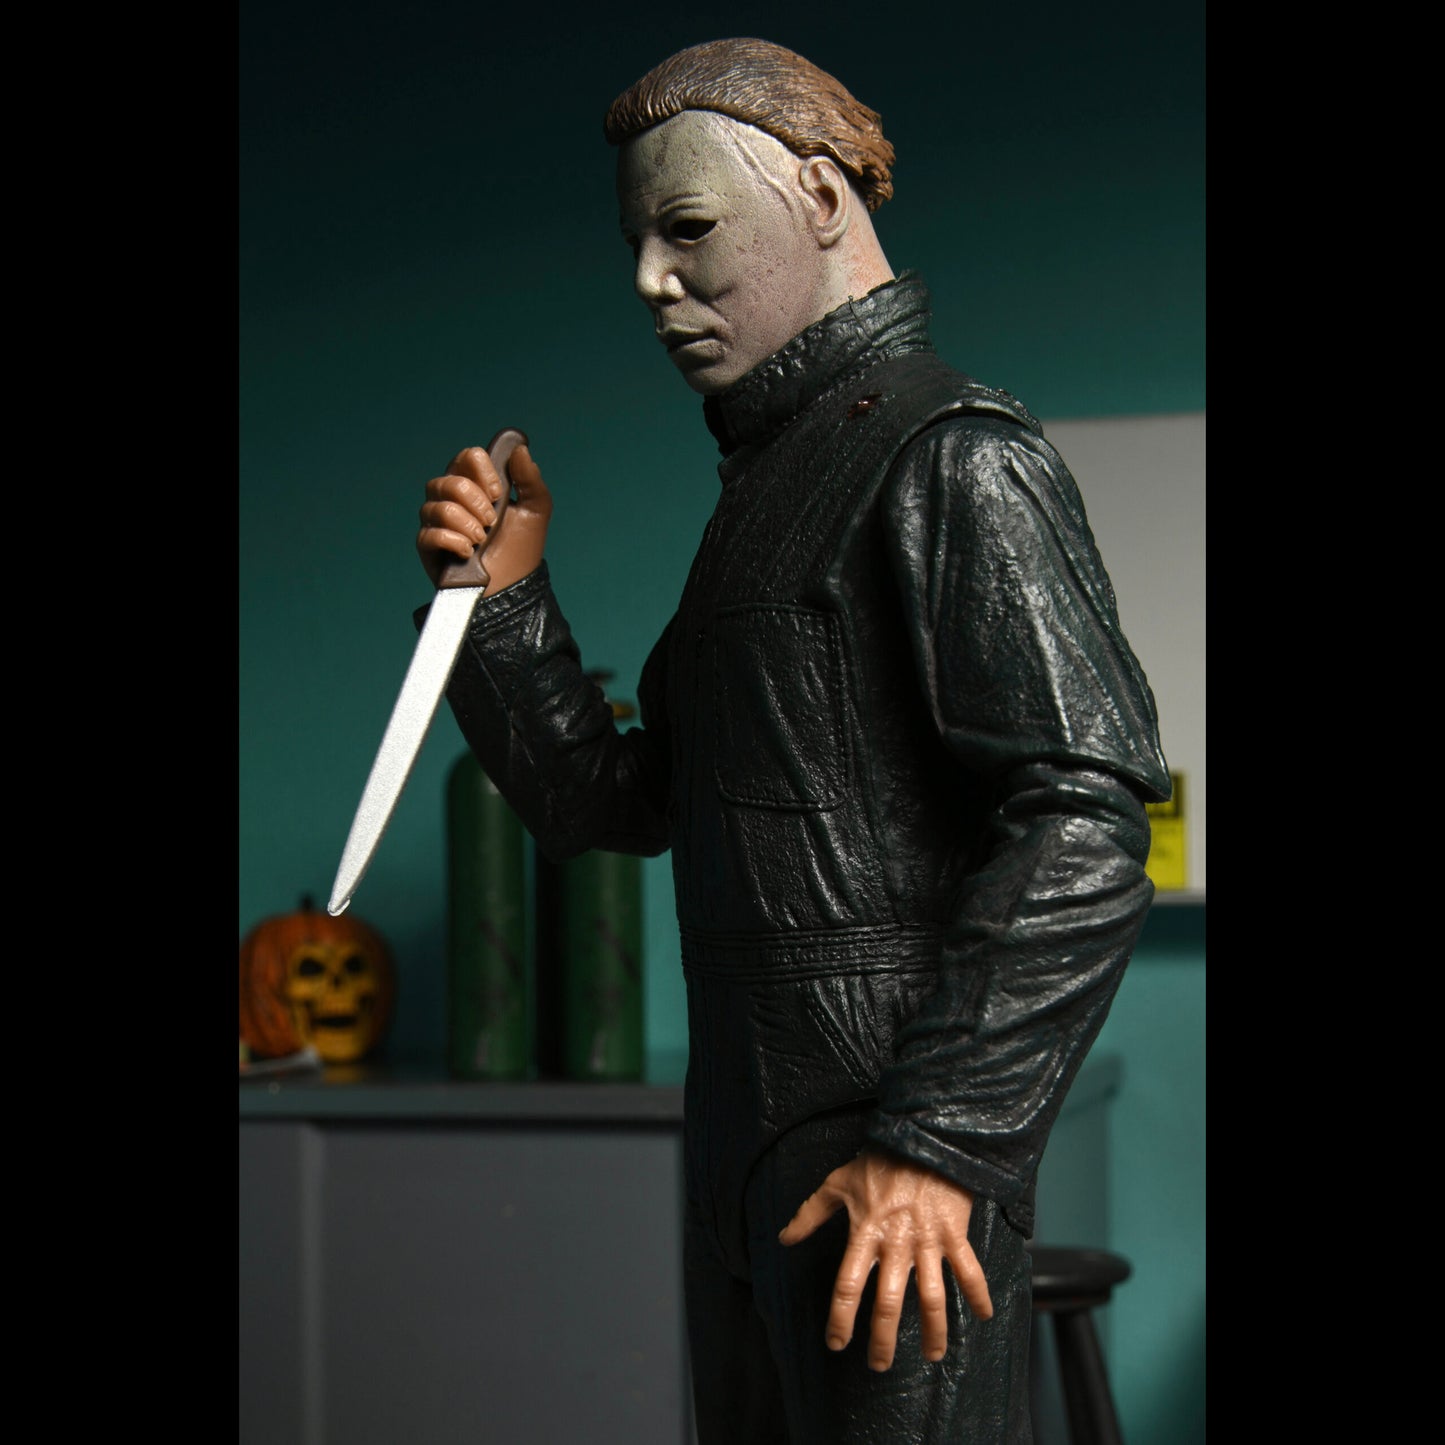 NECA: Halloween II - Ultimate Michael Myers and Dr. Loomis 2-Pack 7" Tall Action Figure